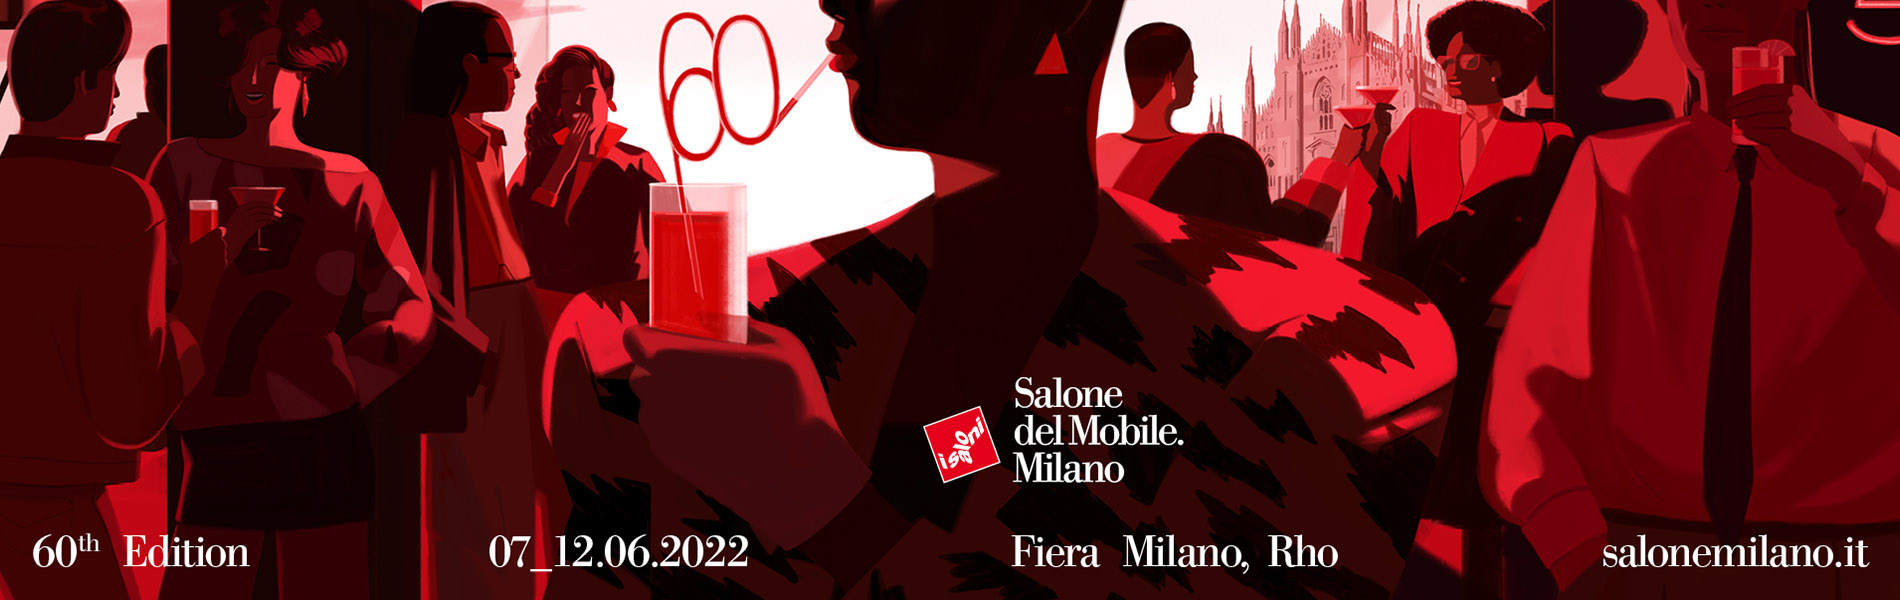 Meet Sunbrella in Milan for the Salone del Mobile, from 7-11 June 2022